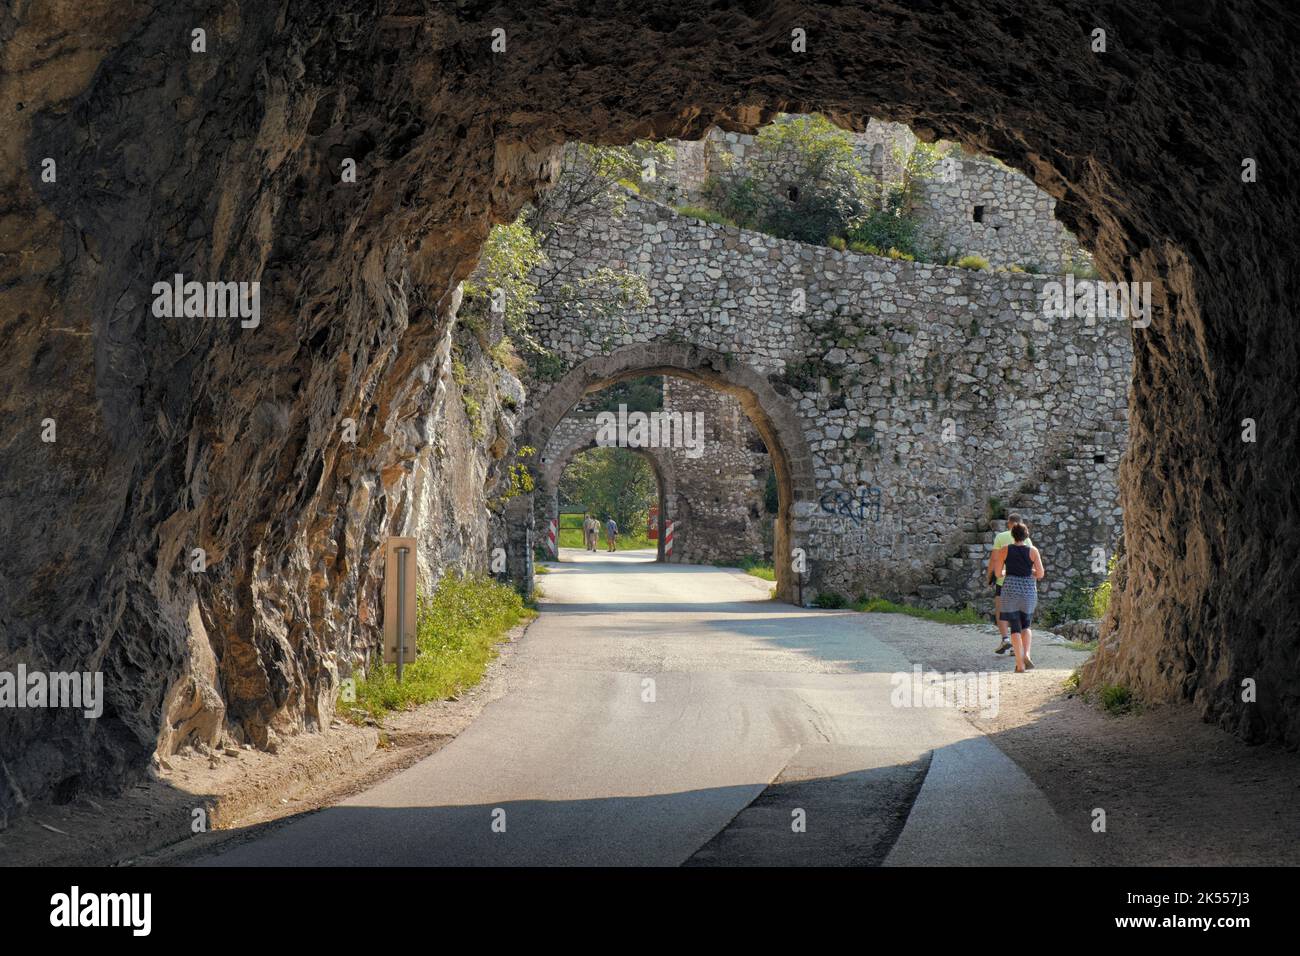 tourists walking a road with tunnel and stone arches of Golubac Fortress, Serbia Stock Photo